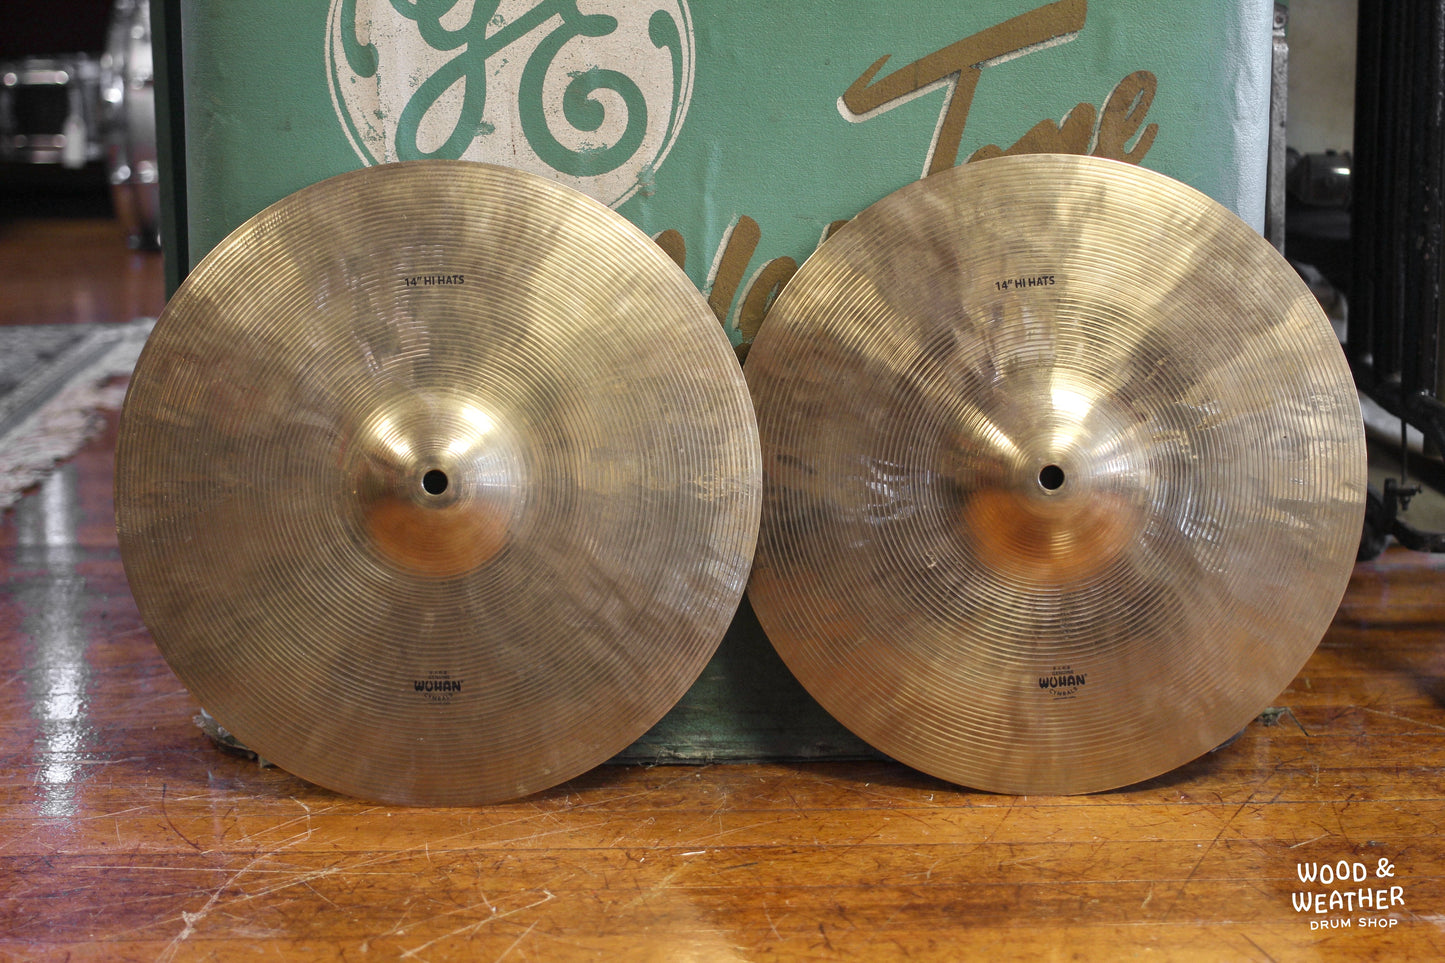 Used Wuhan 14" Hi-Hat Cymbals 975/985g